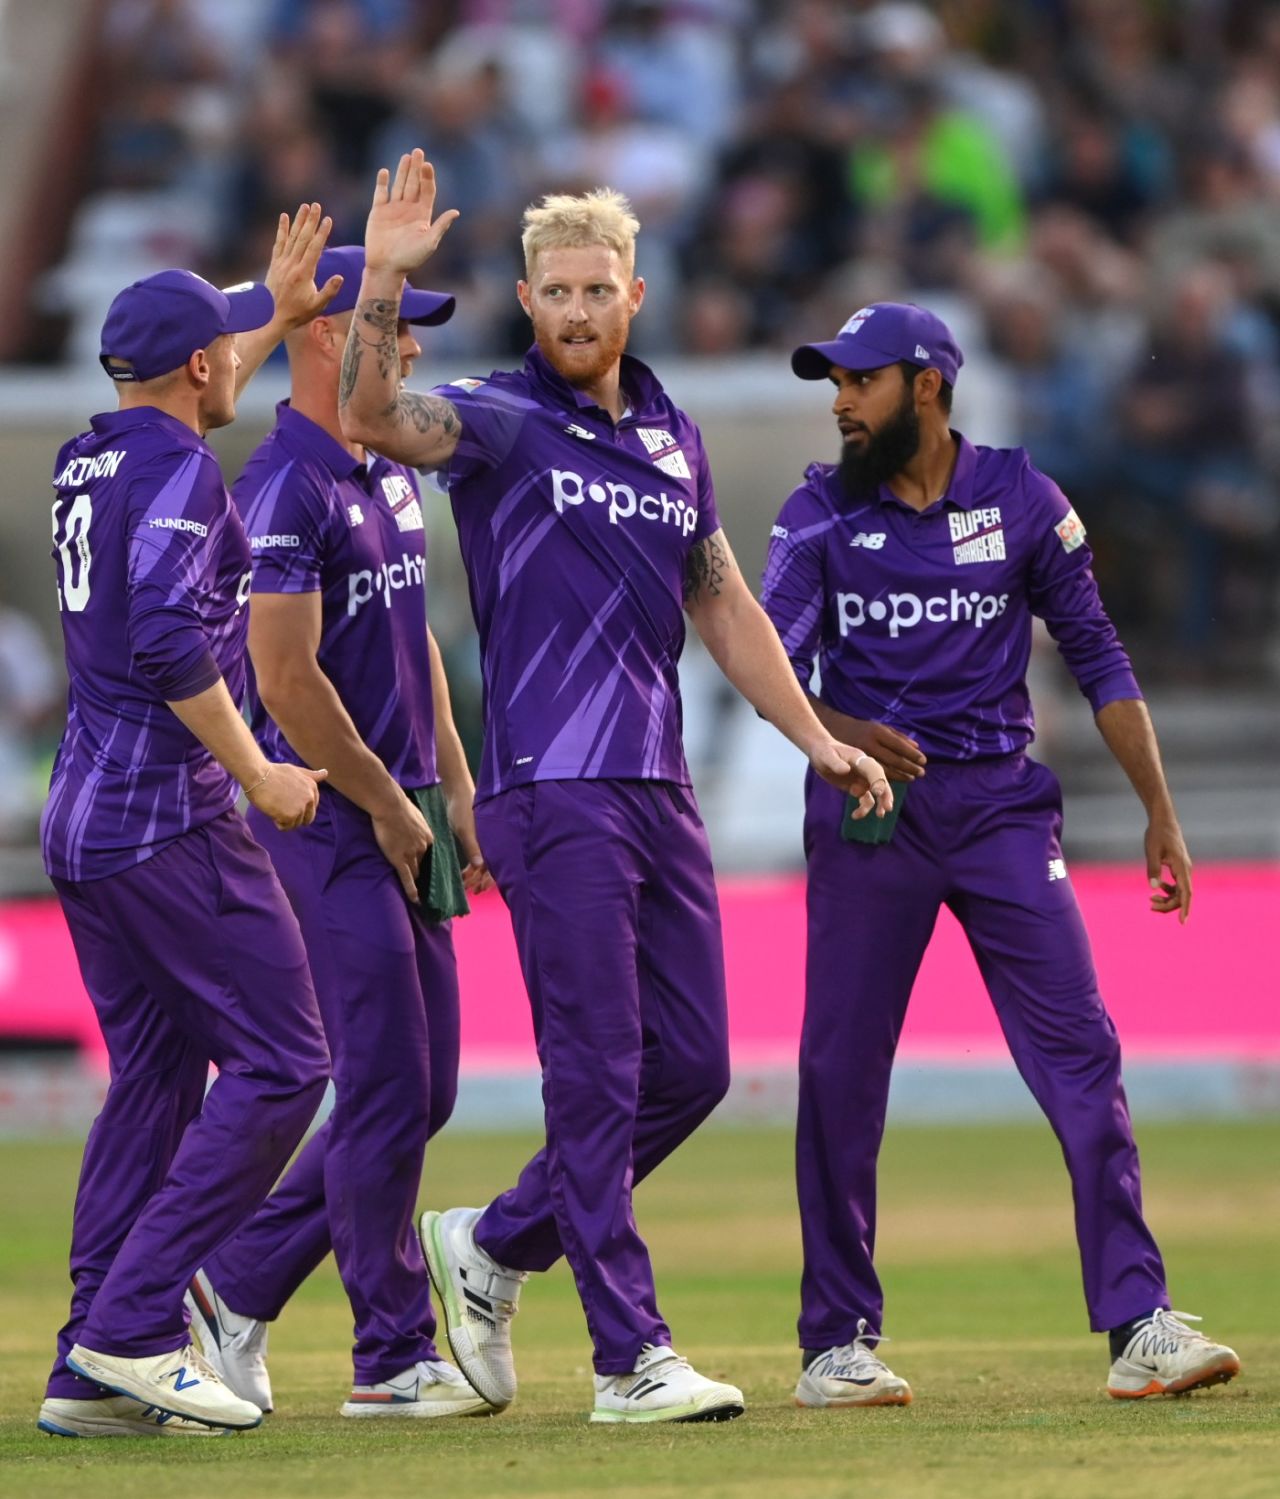 Ben Stokes was in the wickets as Superchargers turned the screw, Trent Rockets vs Northern Superchargers, Men's Hundred, Trent Bridge, July 26, 2021